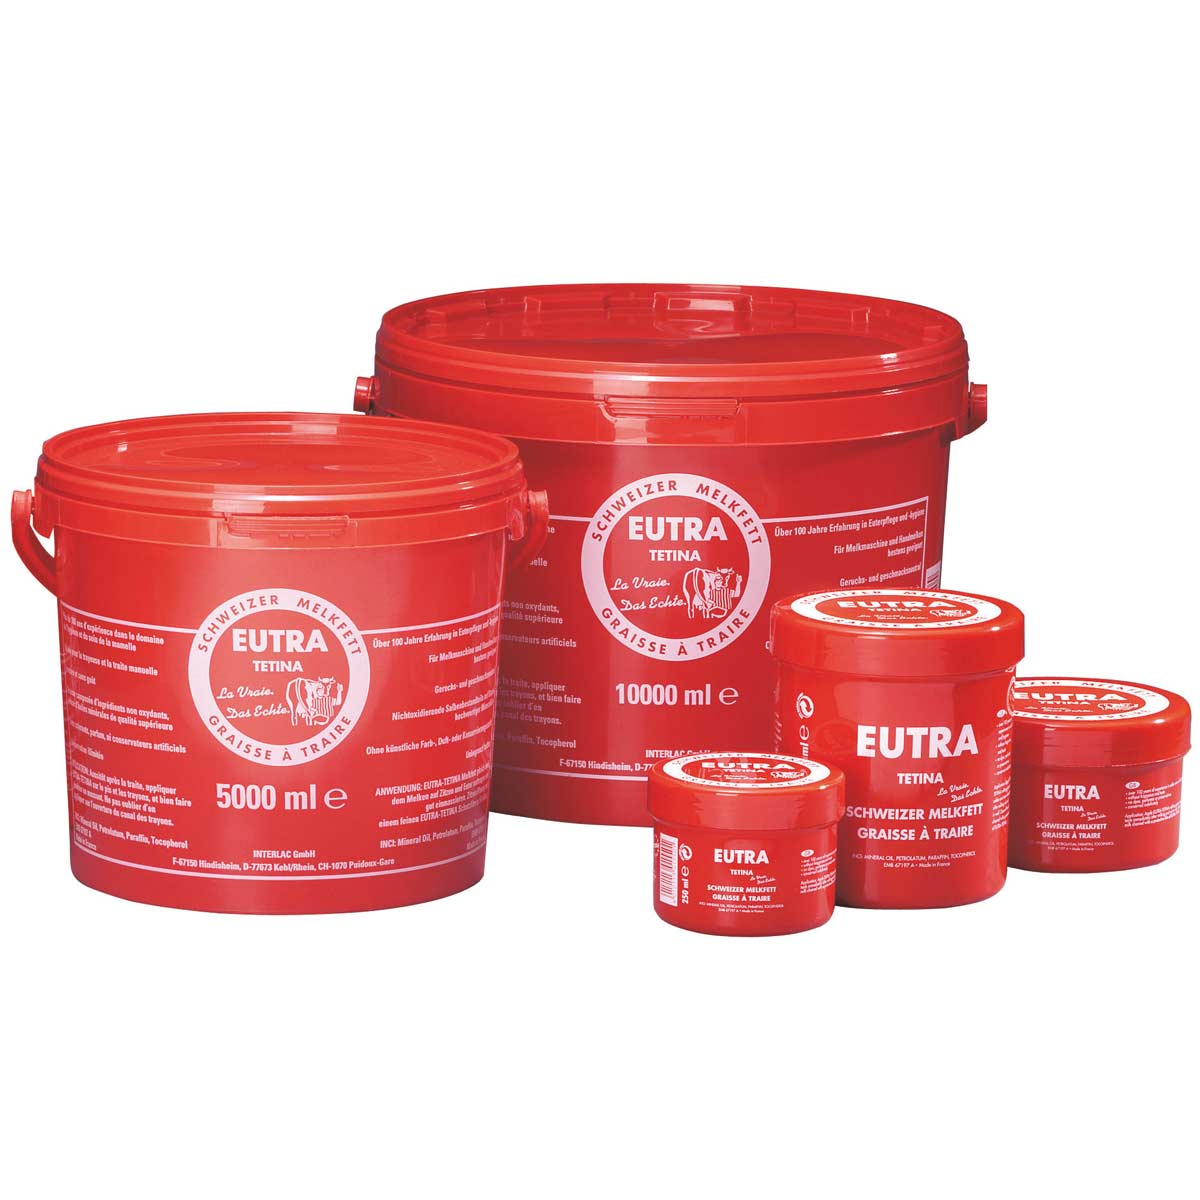 EUTRA milking grease